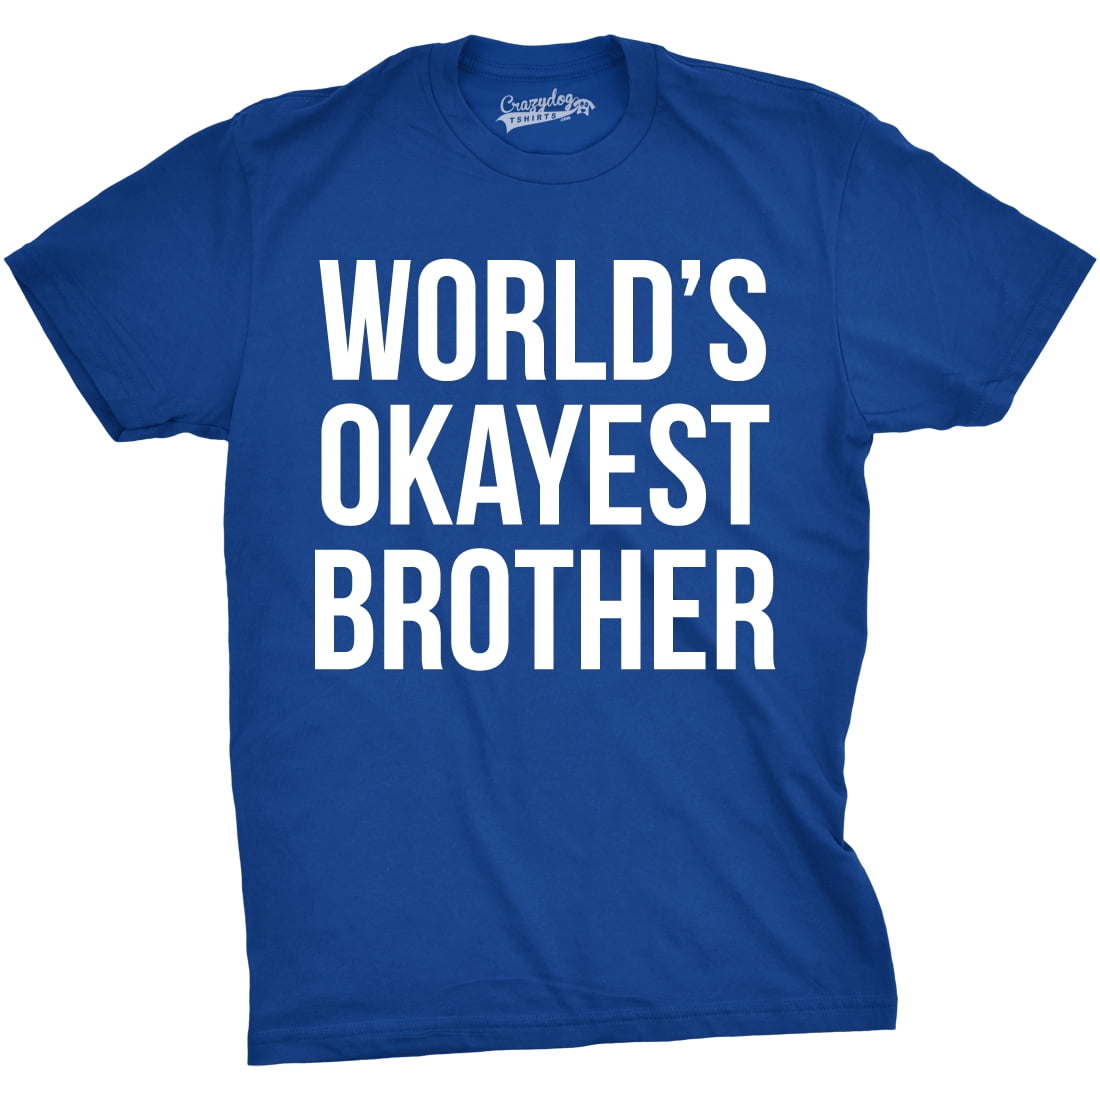 Mens Worlds Okayest Brother Shirt Funny T Shirts Big Brother Sister Gift Idea